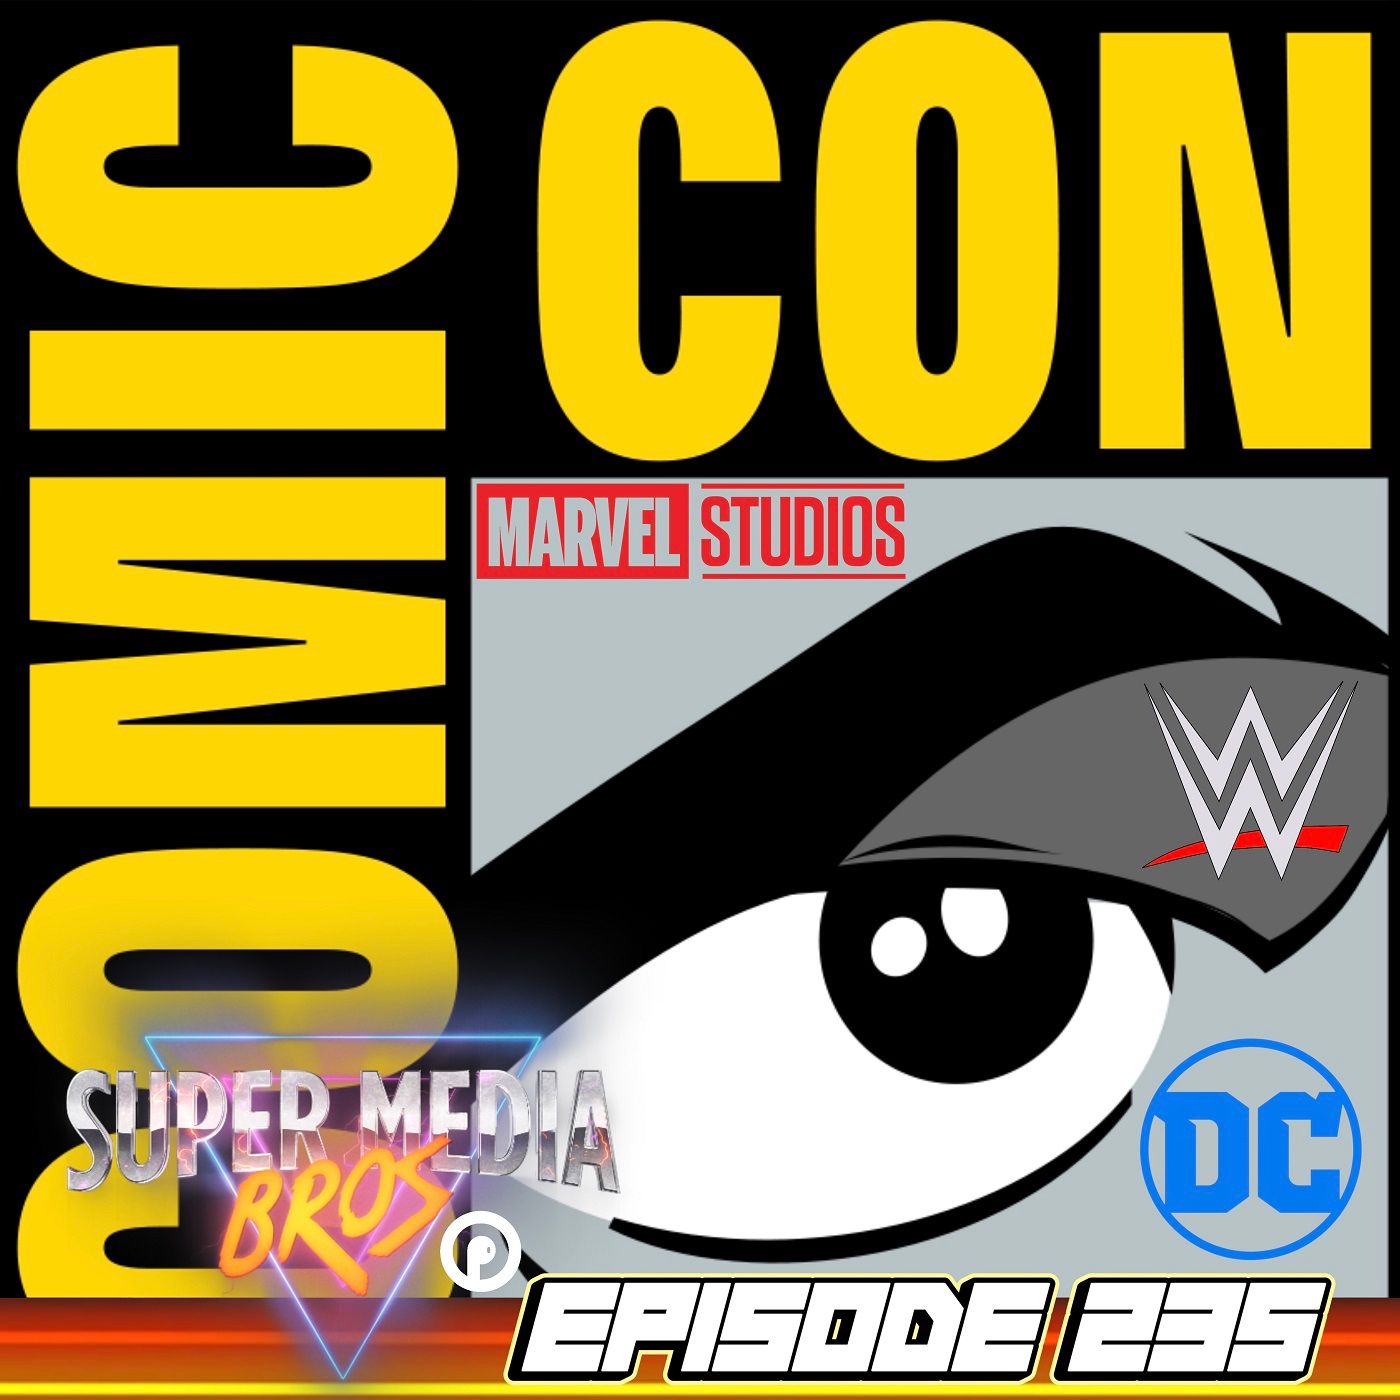 SDCC: Superheroes and Superzeroes (Ep. 235)